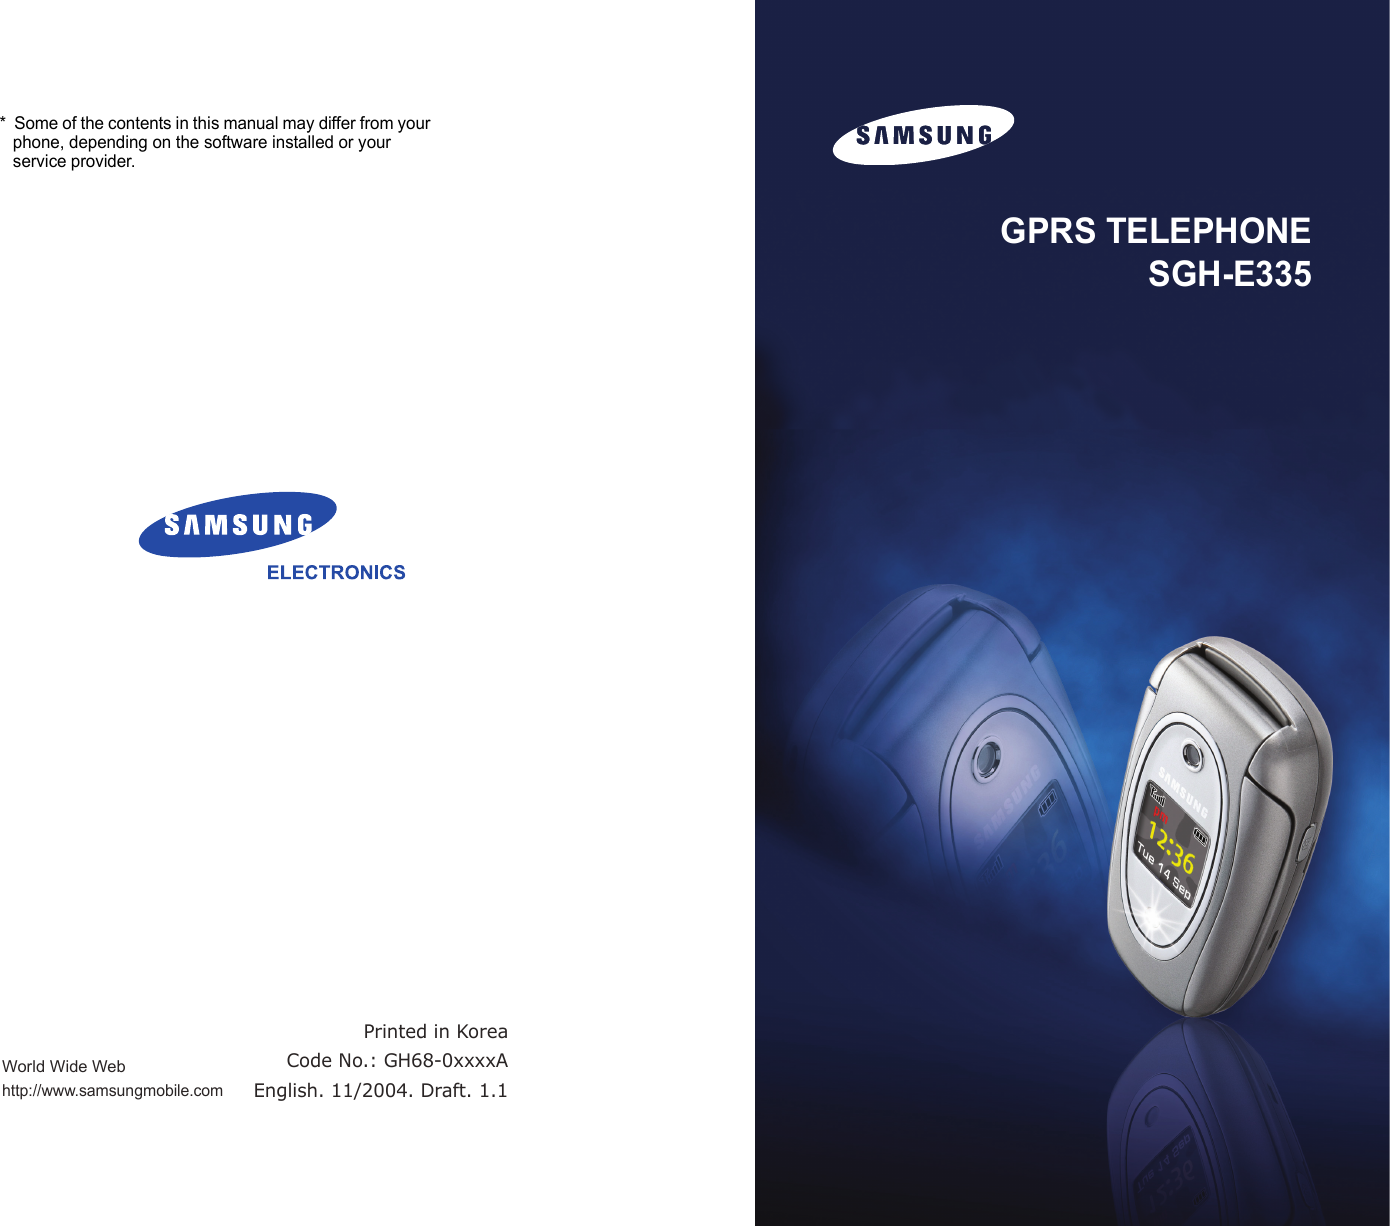 World Wide Webhttp://www.samsungmobile.com*  Some of the contents in this manual may differ from your phone, depending on the software installed or your service provider.Printed in KoreaCode No.: GH68-0xxxxAEnglish. 11/2004. Draft. 1.1GPRS TELEPHONESGH-E335